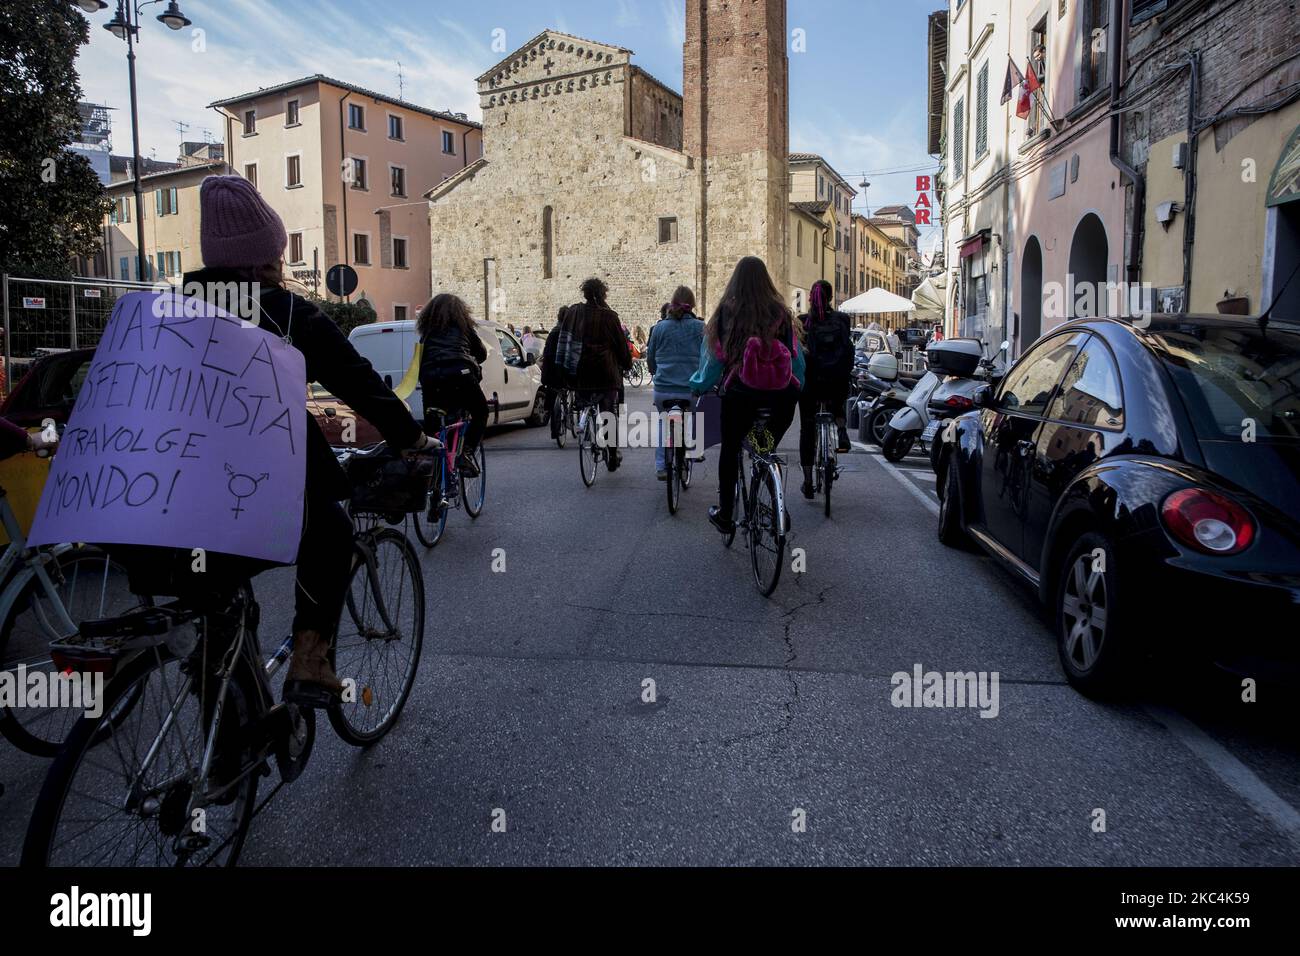 Feminist activists gathered today, 25 November 2020, for the International Day for the Elimination of Violence against Women, in Pisa, Italy. Despite the anti-covid measures, the activists decided to make a symbolic gesture by riding the bikes across the city with slogans and chants. (Photo by Enrico Mattia Del Punta/NurPhoto) Stock Photo